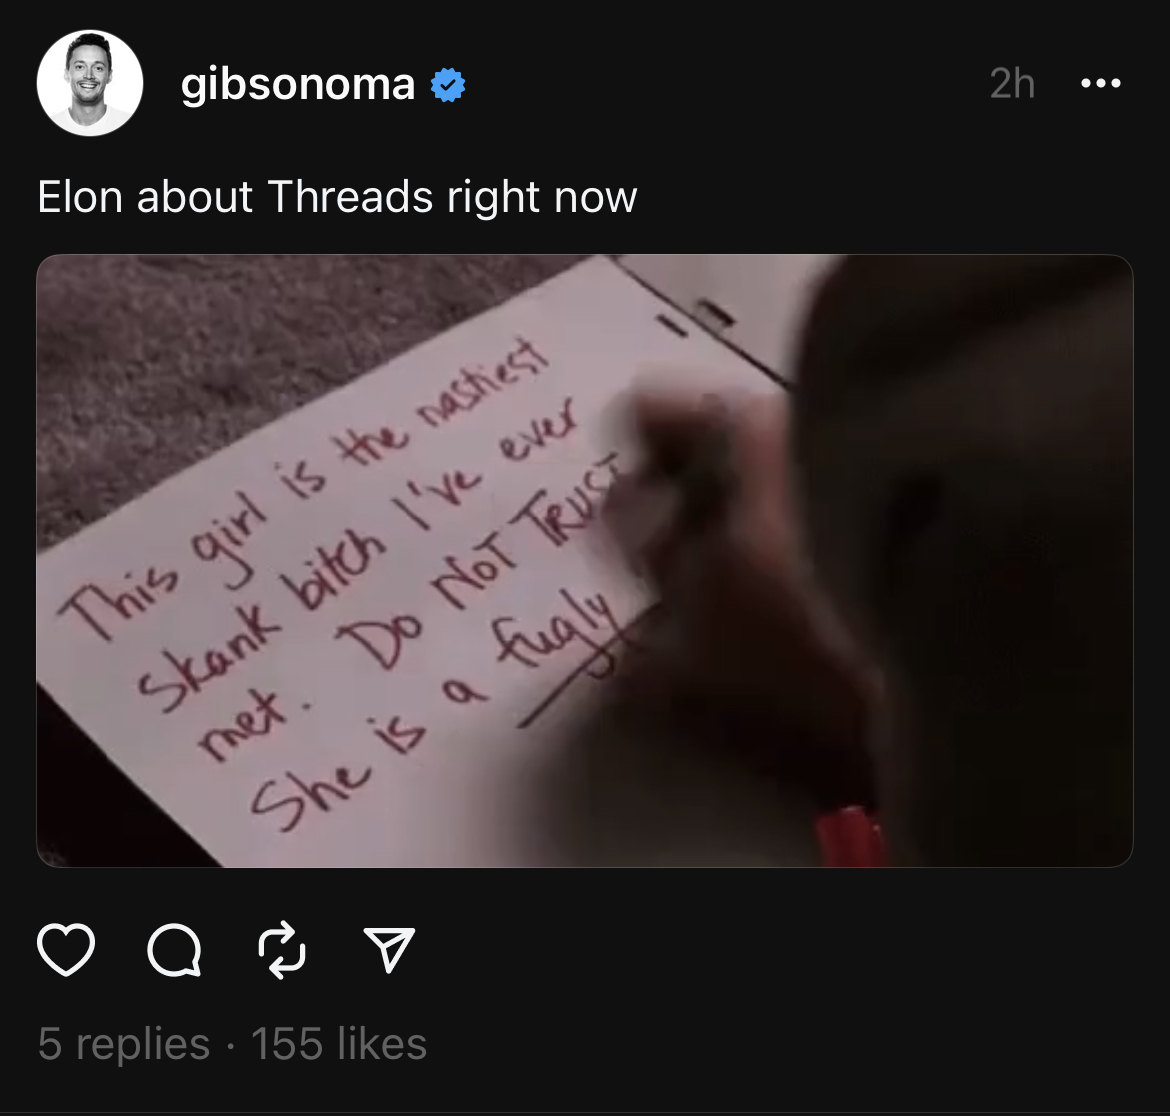 A thread that says Elon about threads right now with an image from Mean Girls